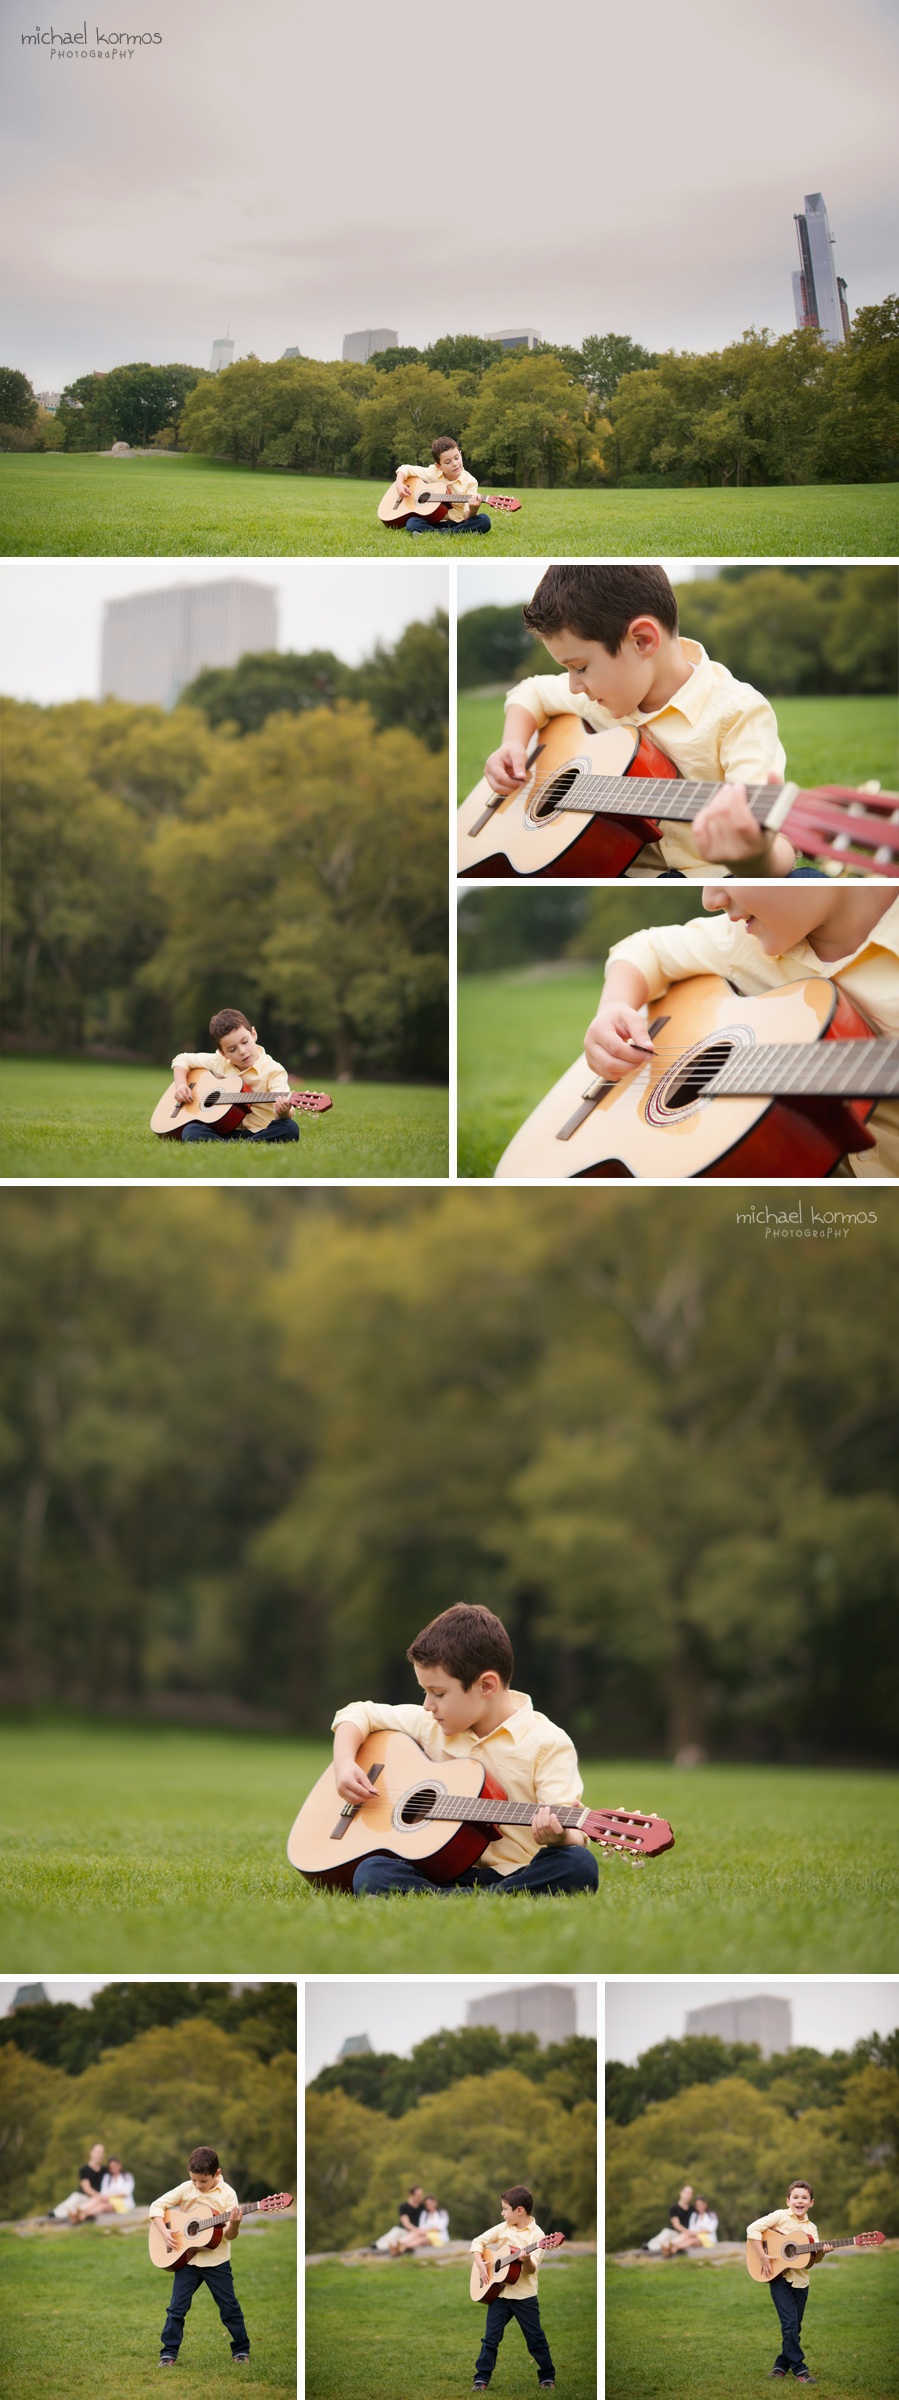 boy playing his guitar in Central Park Manhattan